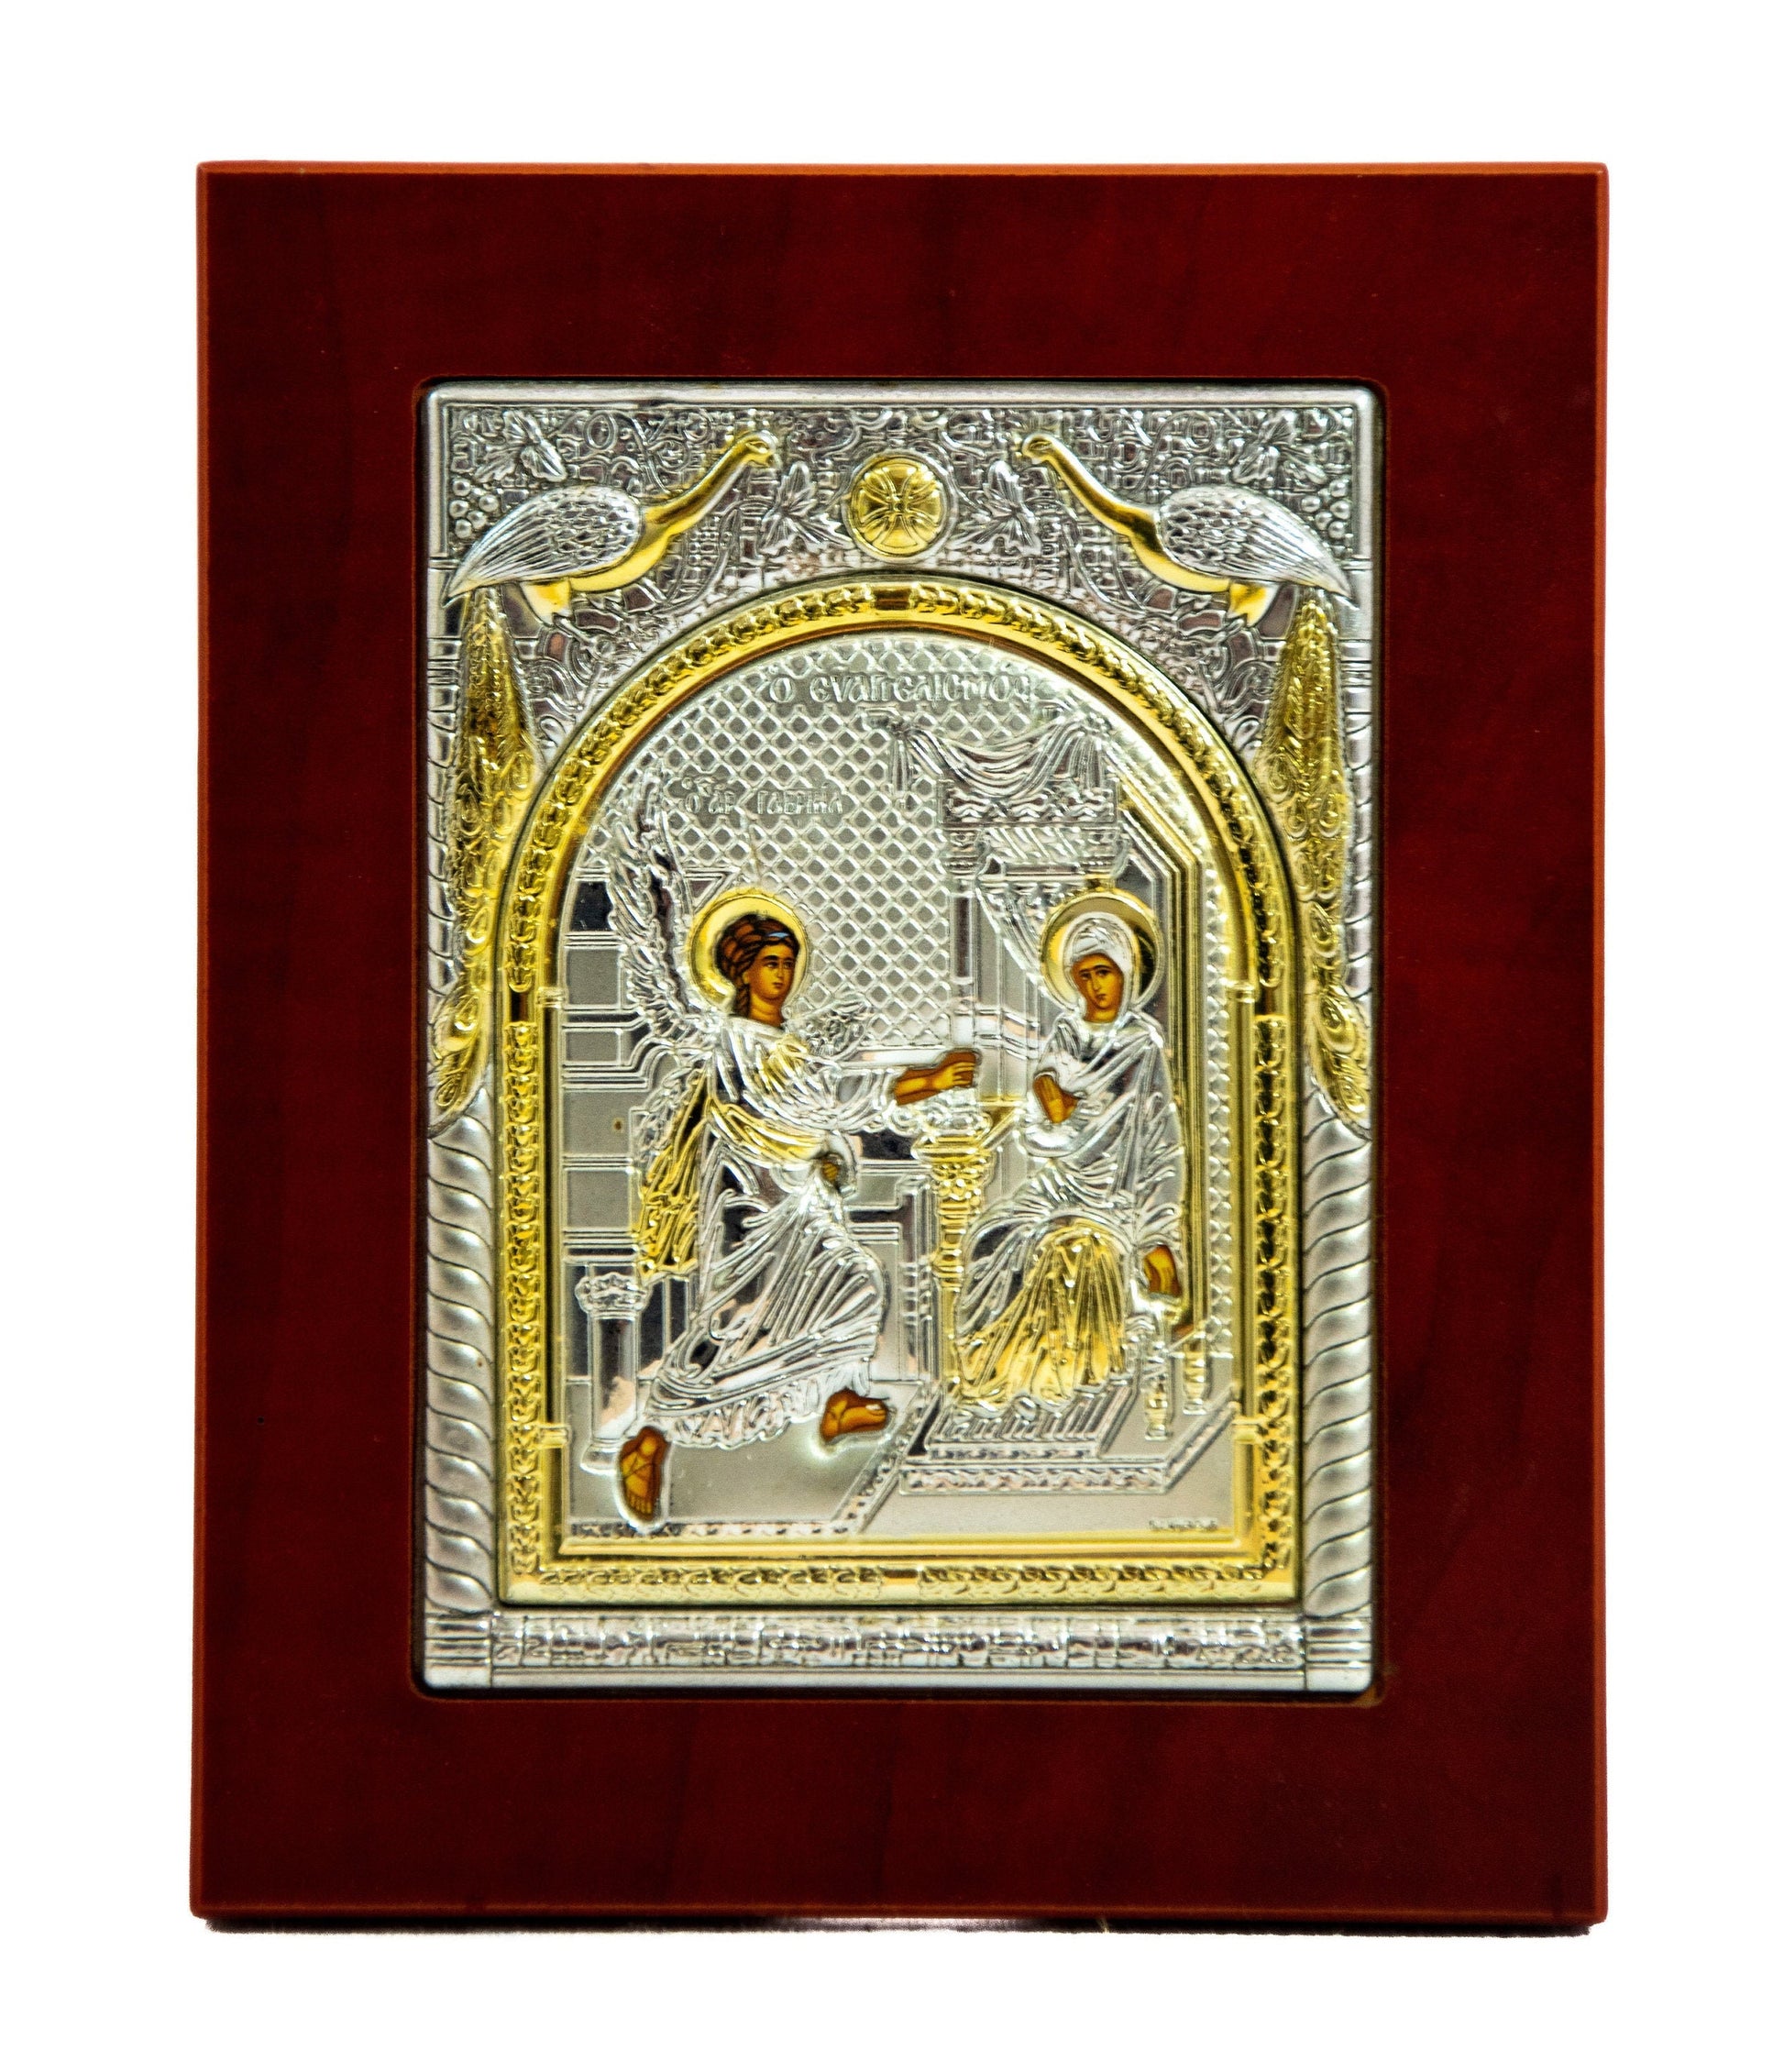 The Annunciation of Virgin Mary icon, Handmade Silver Greek Orthodox Icon of Mother of God, Theotokos Byzantine art wall hanging wood plaque TheHolyArt